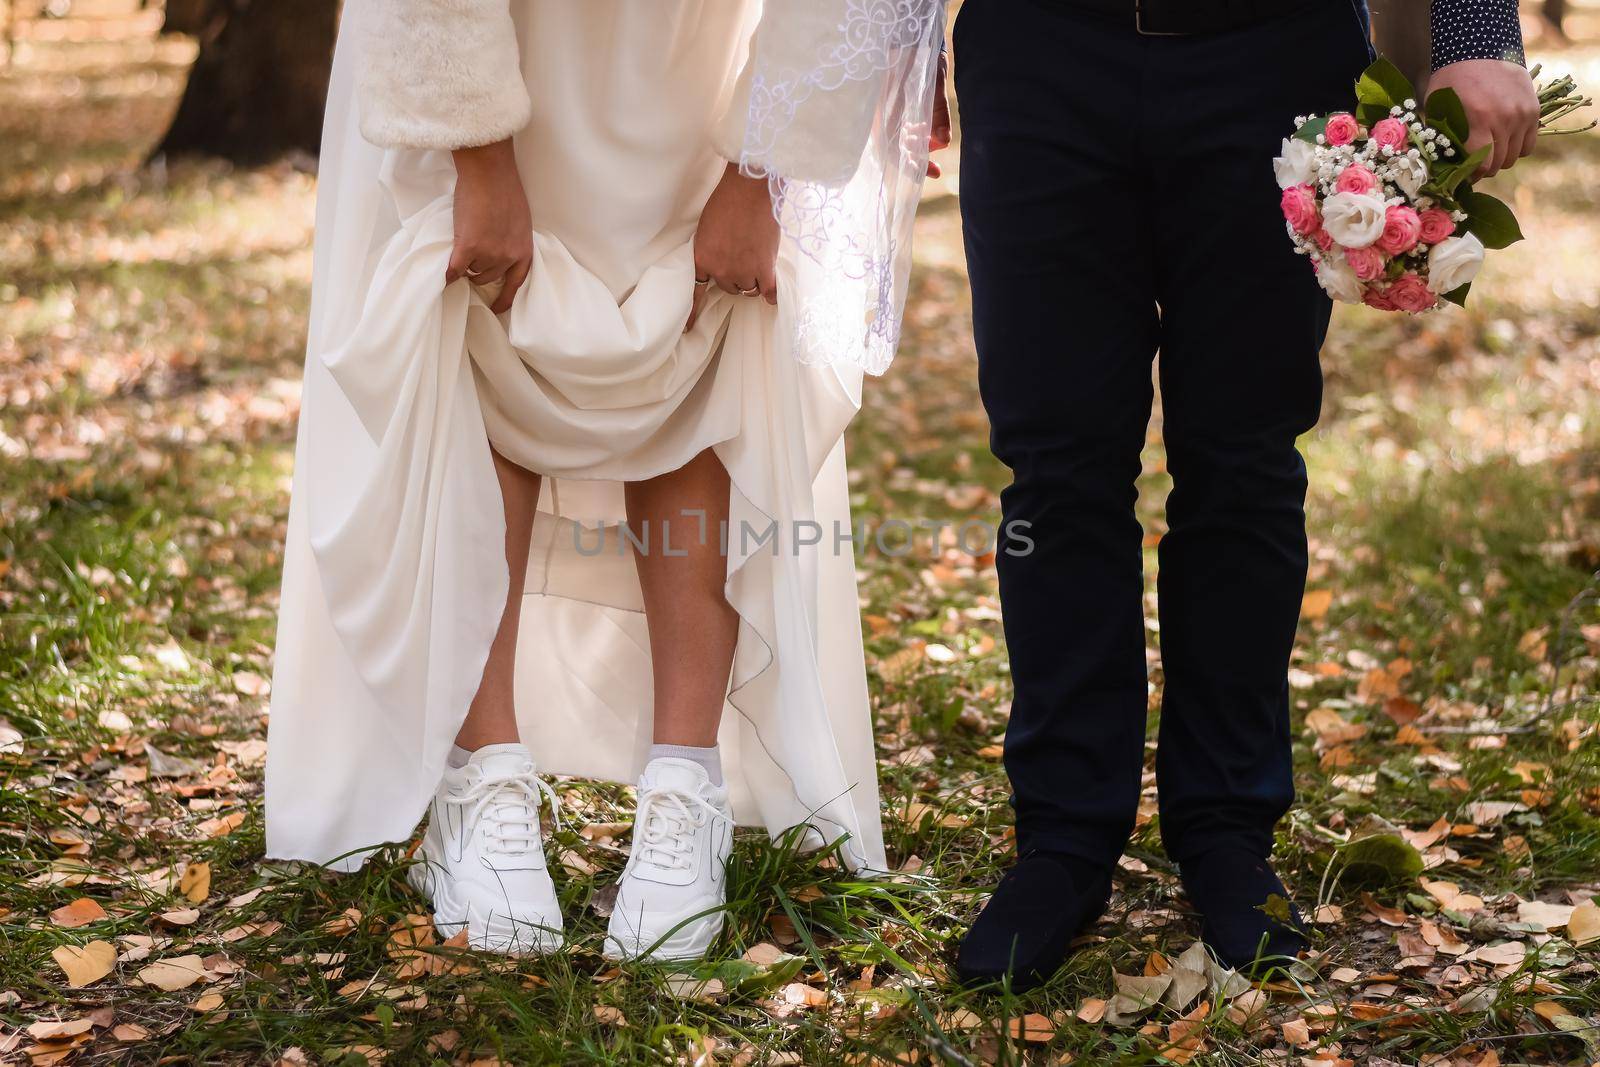 the bride lifted her skirt, showing white sneakers. by ja-aljona